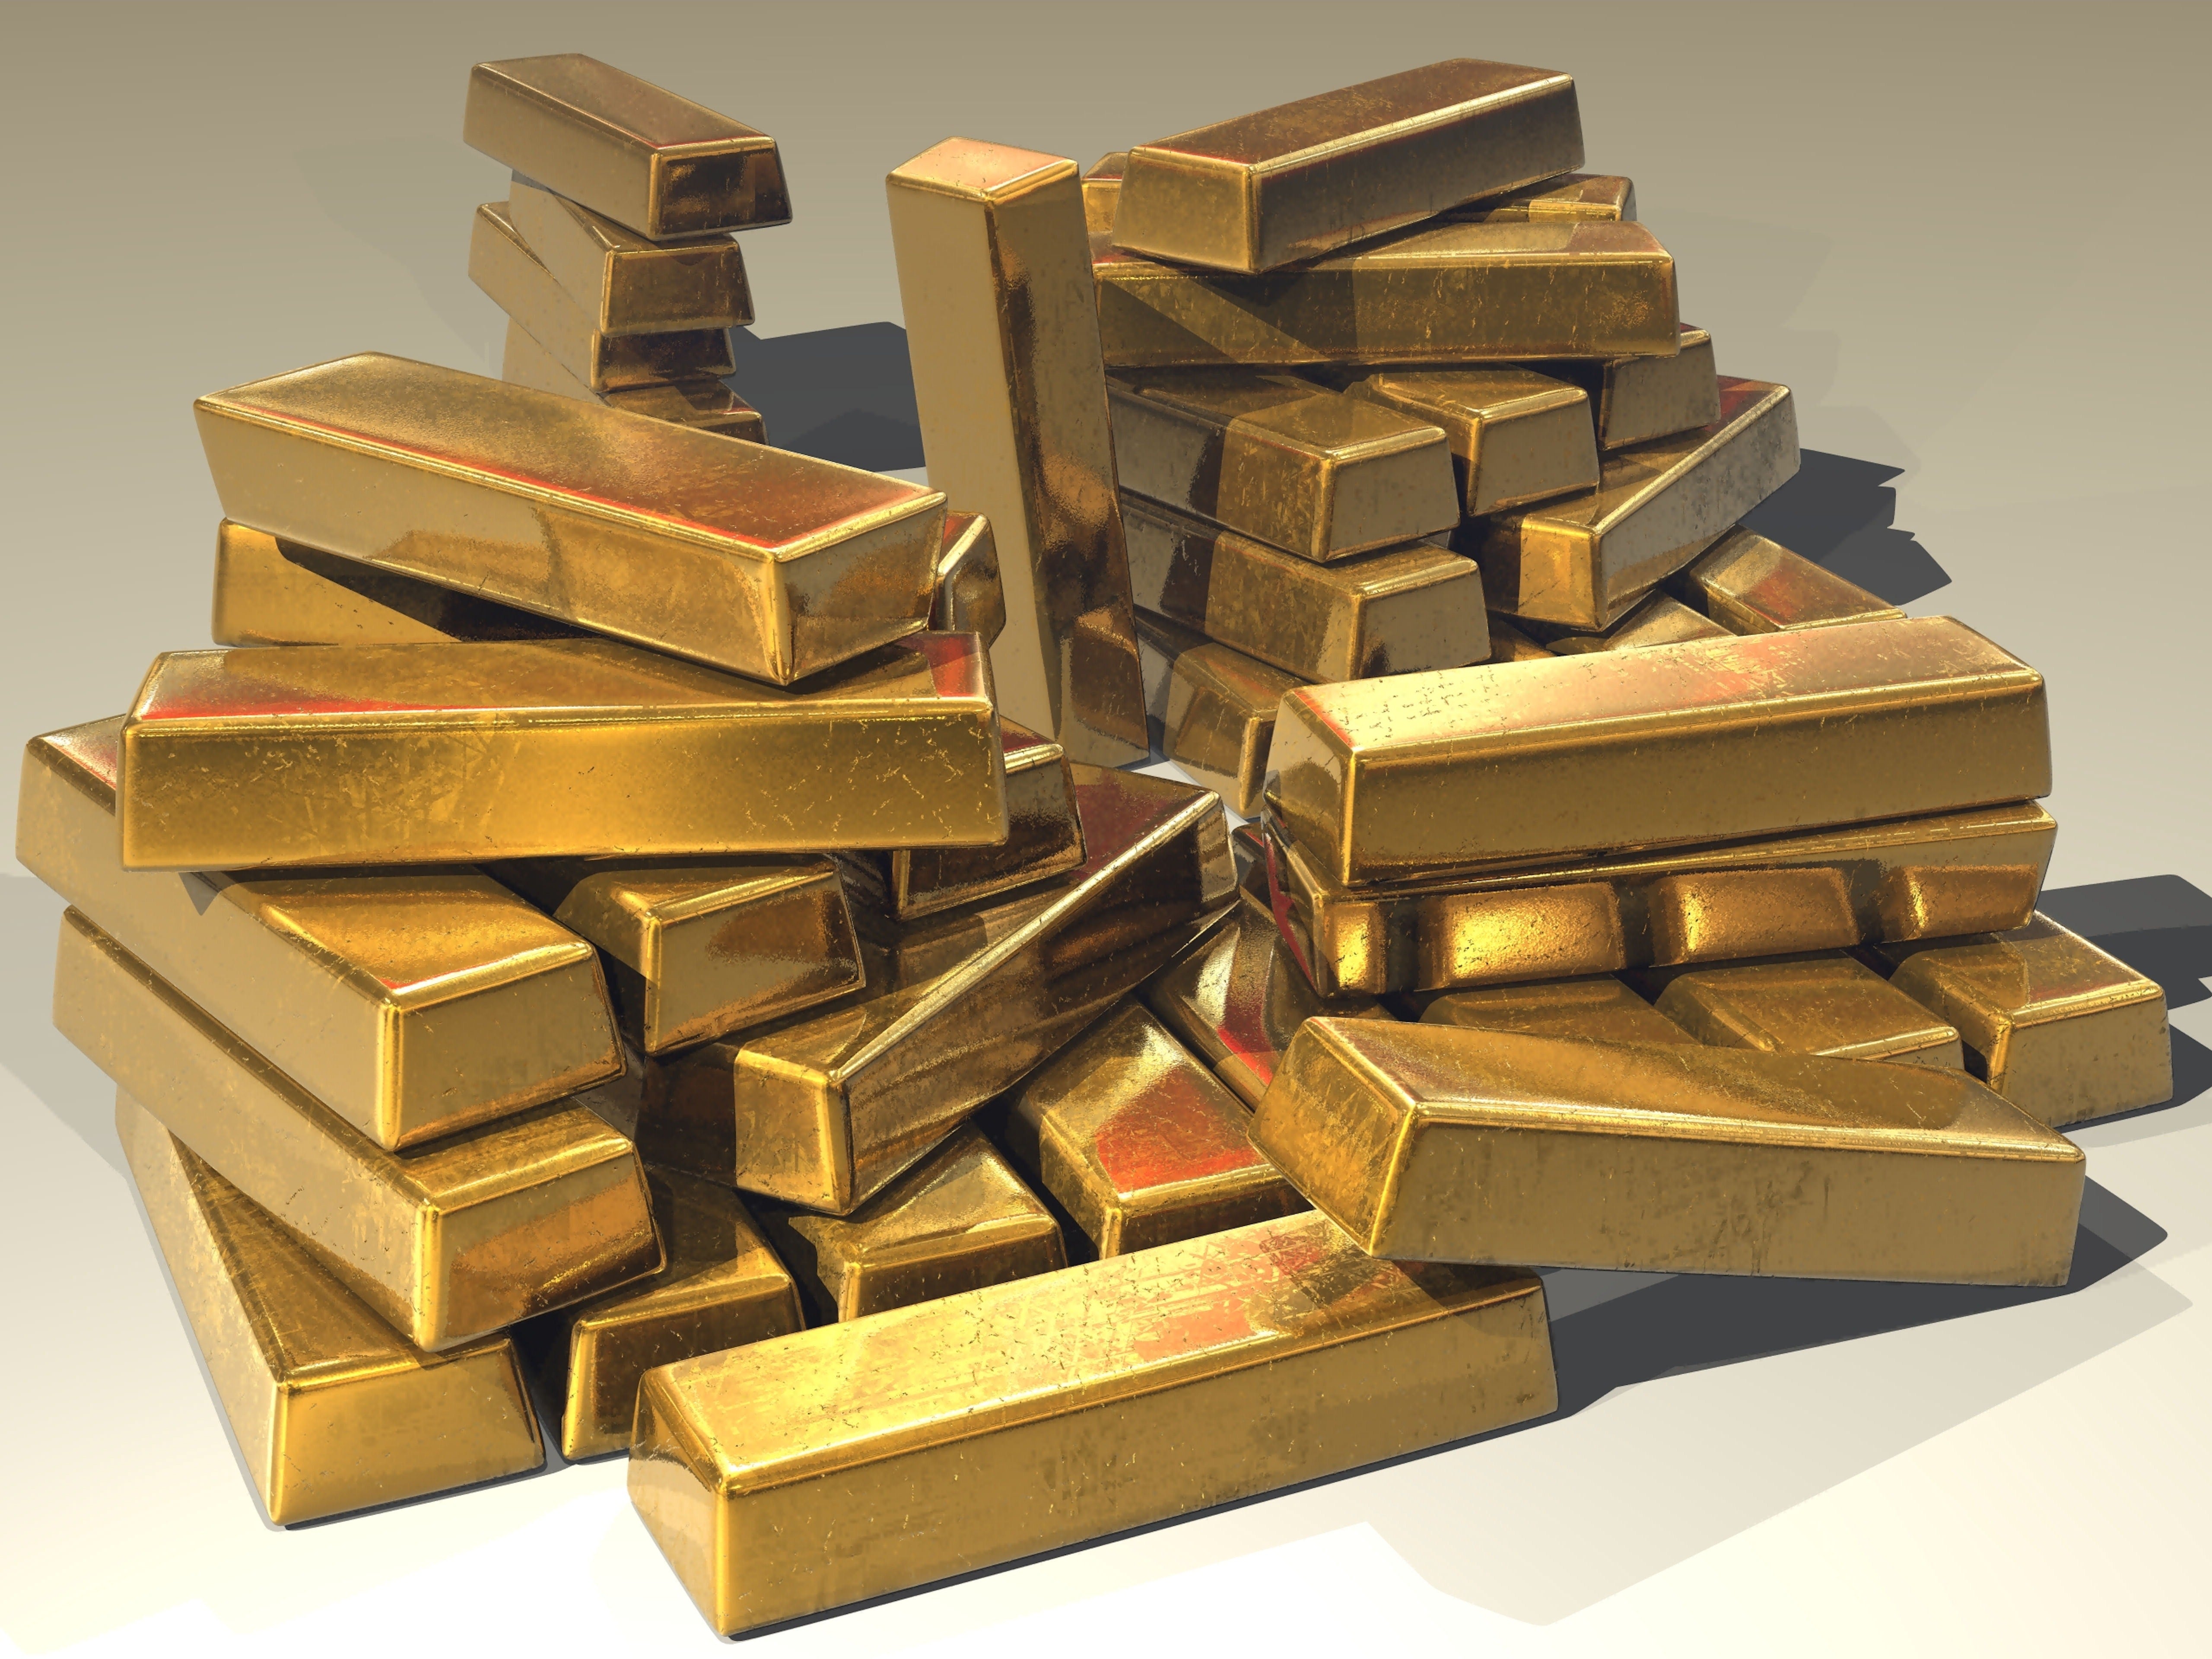 Gold vs Silver vs Bronze - Which Is The Better Investment?